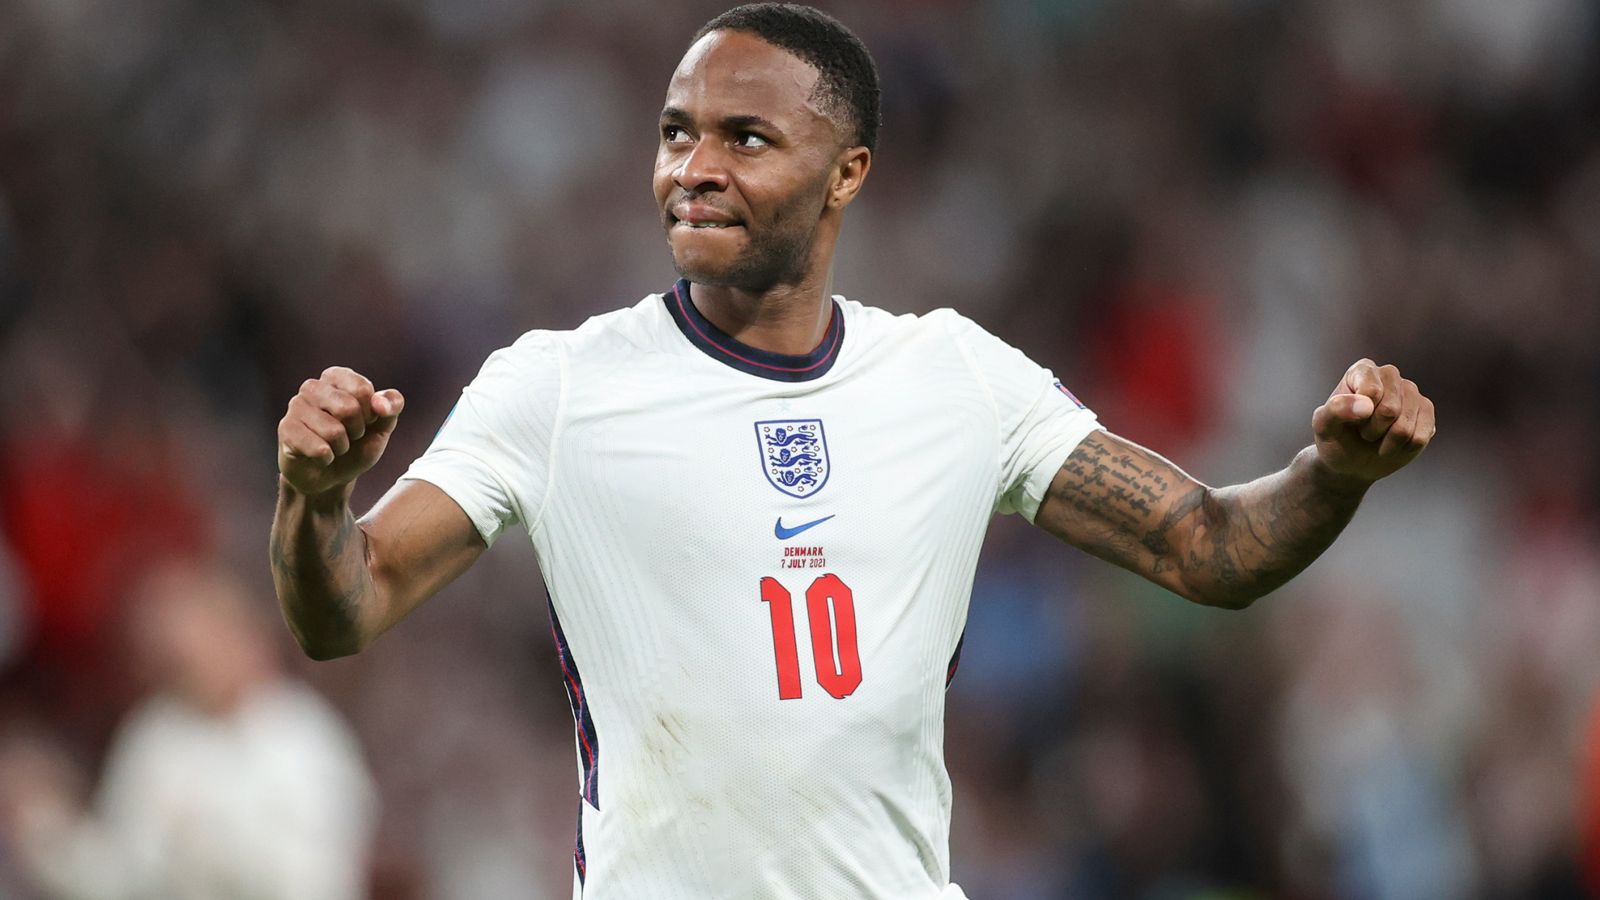 Raheem Sterling's brilliance has been key to England's success at Euro